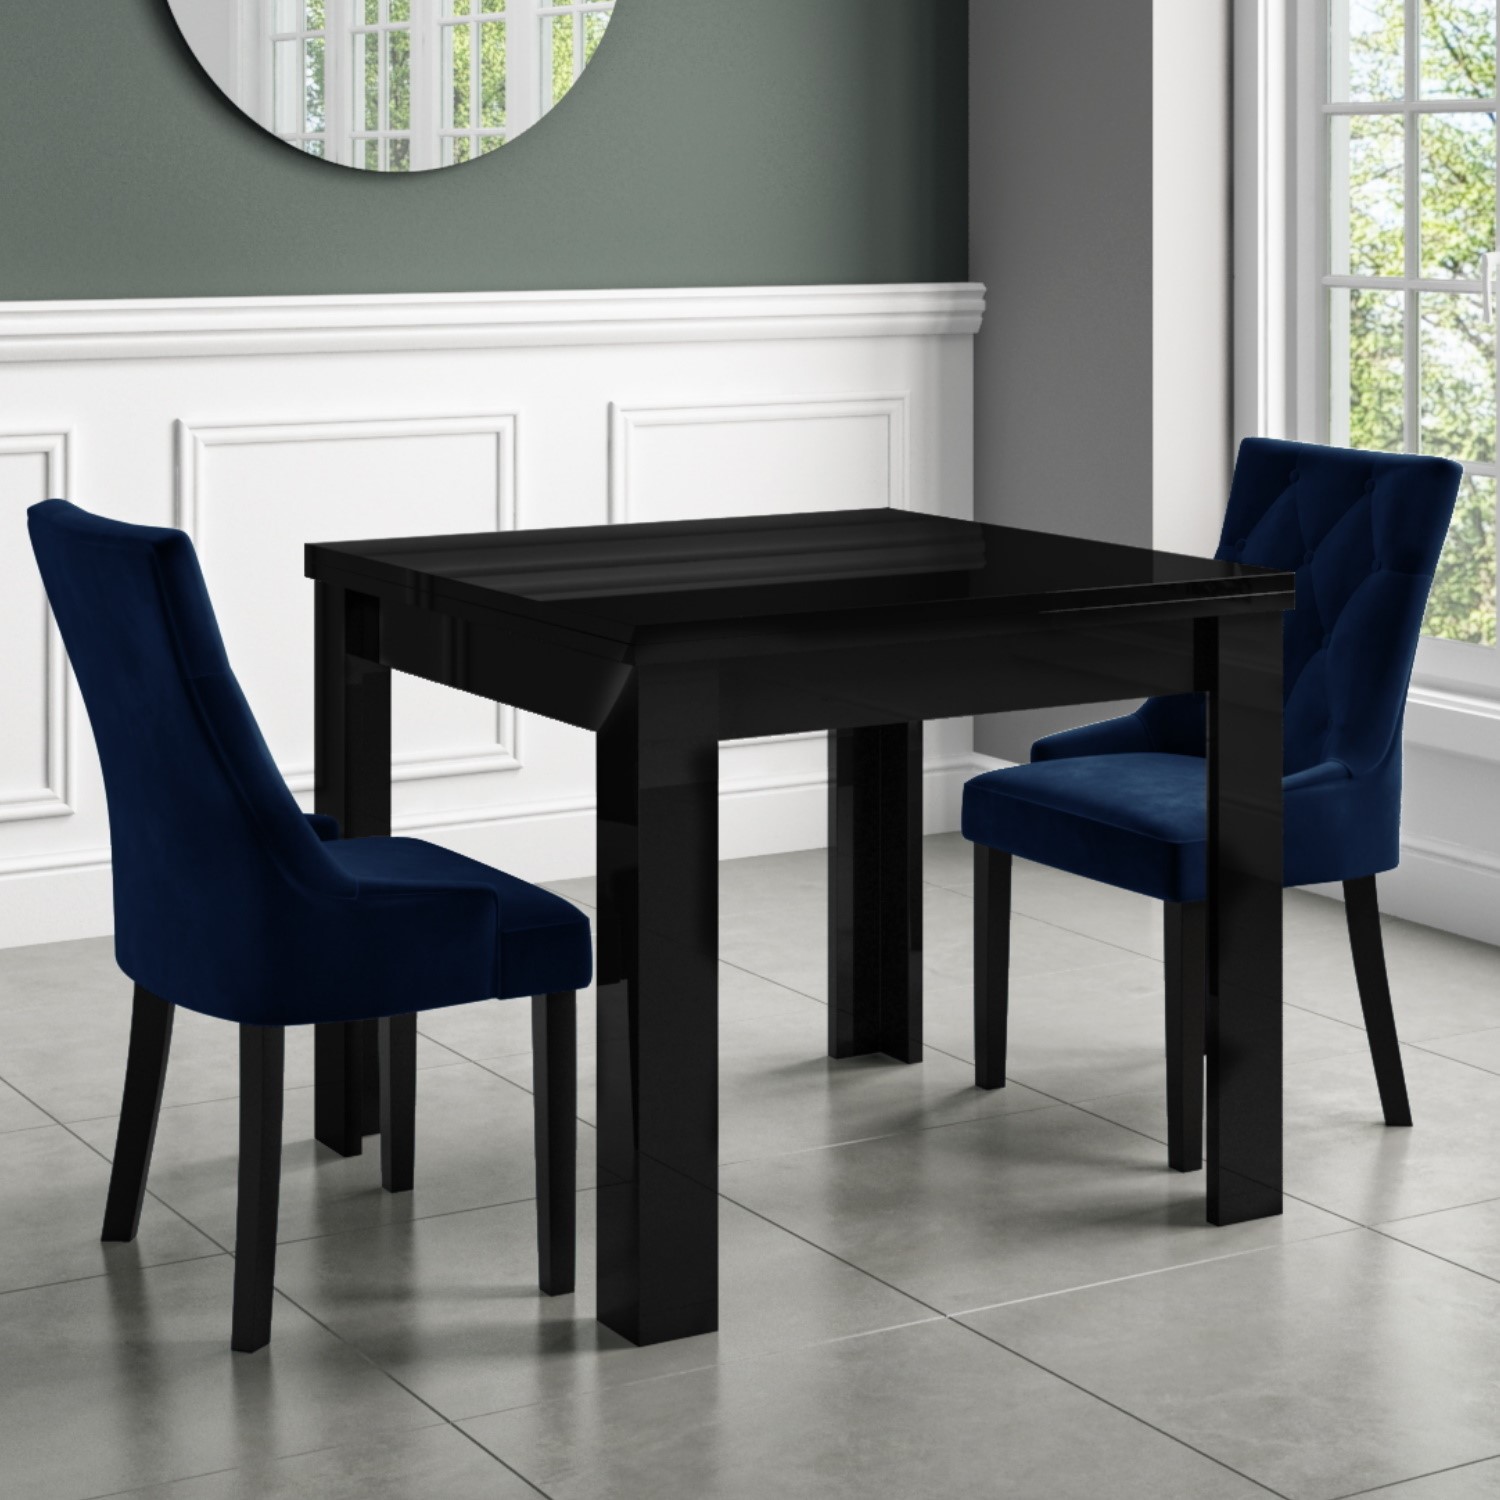 Vivienne Black High Gloss Dining Table, Black High Dining Table And Chairs